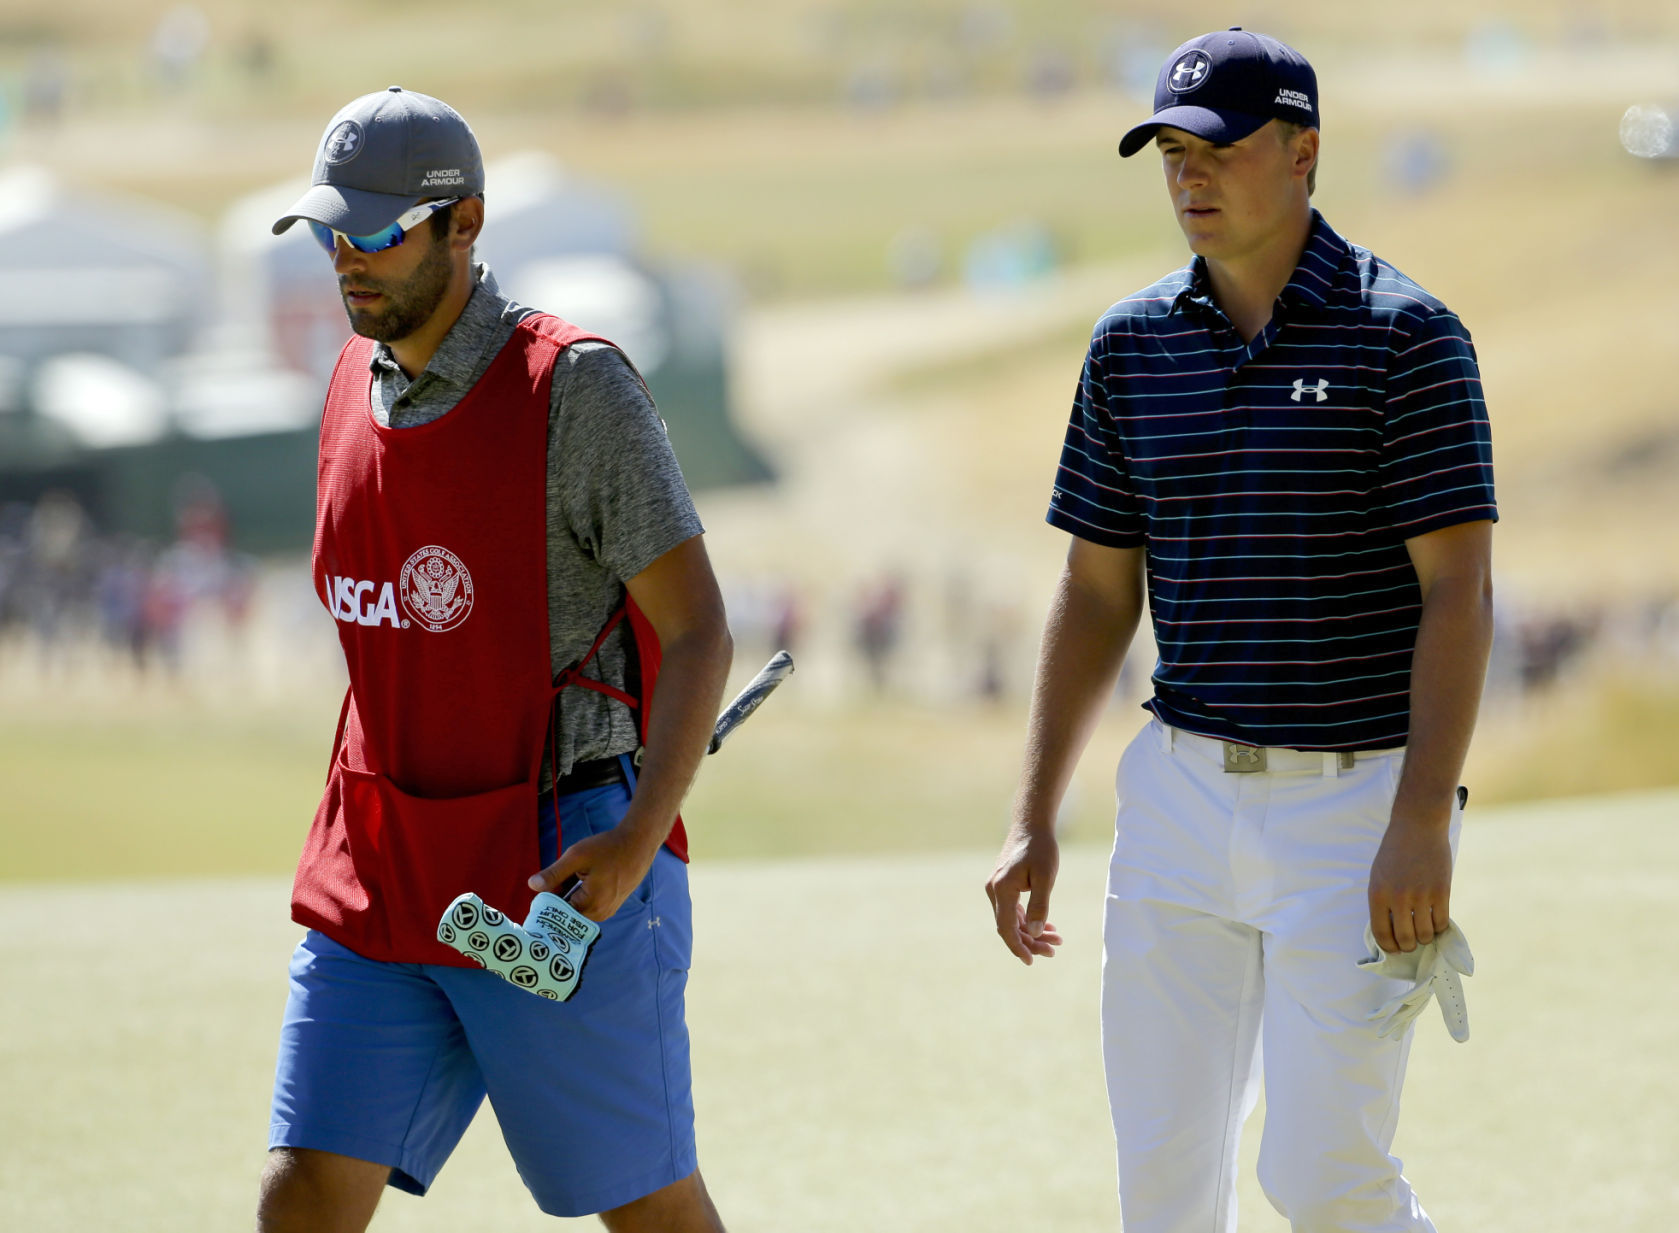 Poe: Spieth leaned on caddy Greller at 